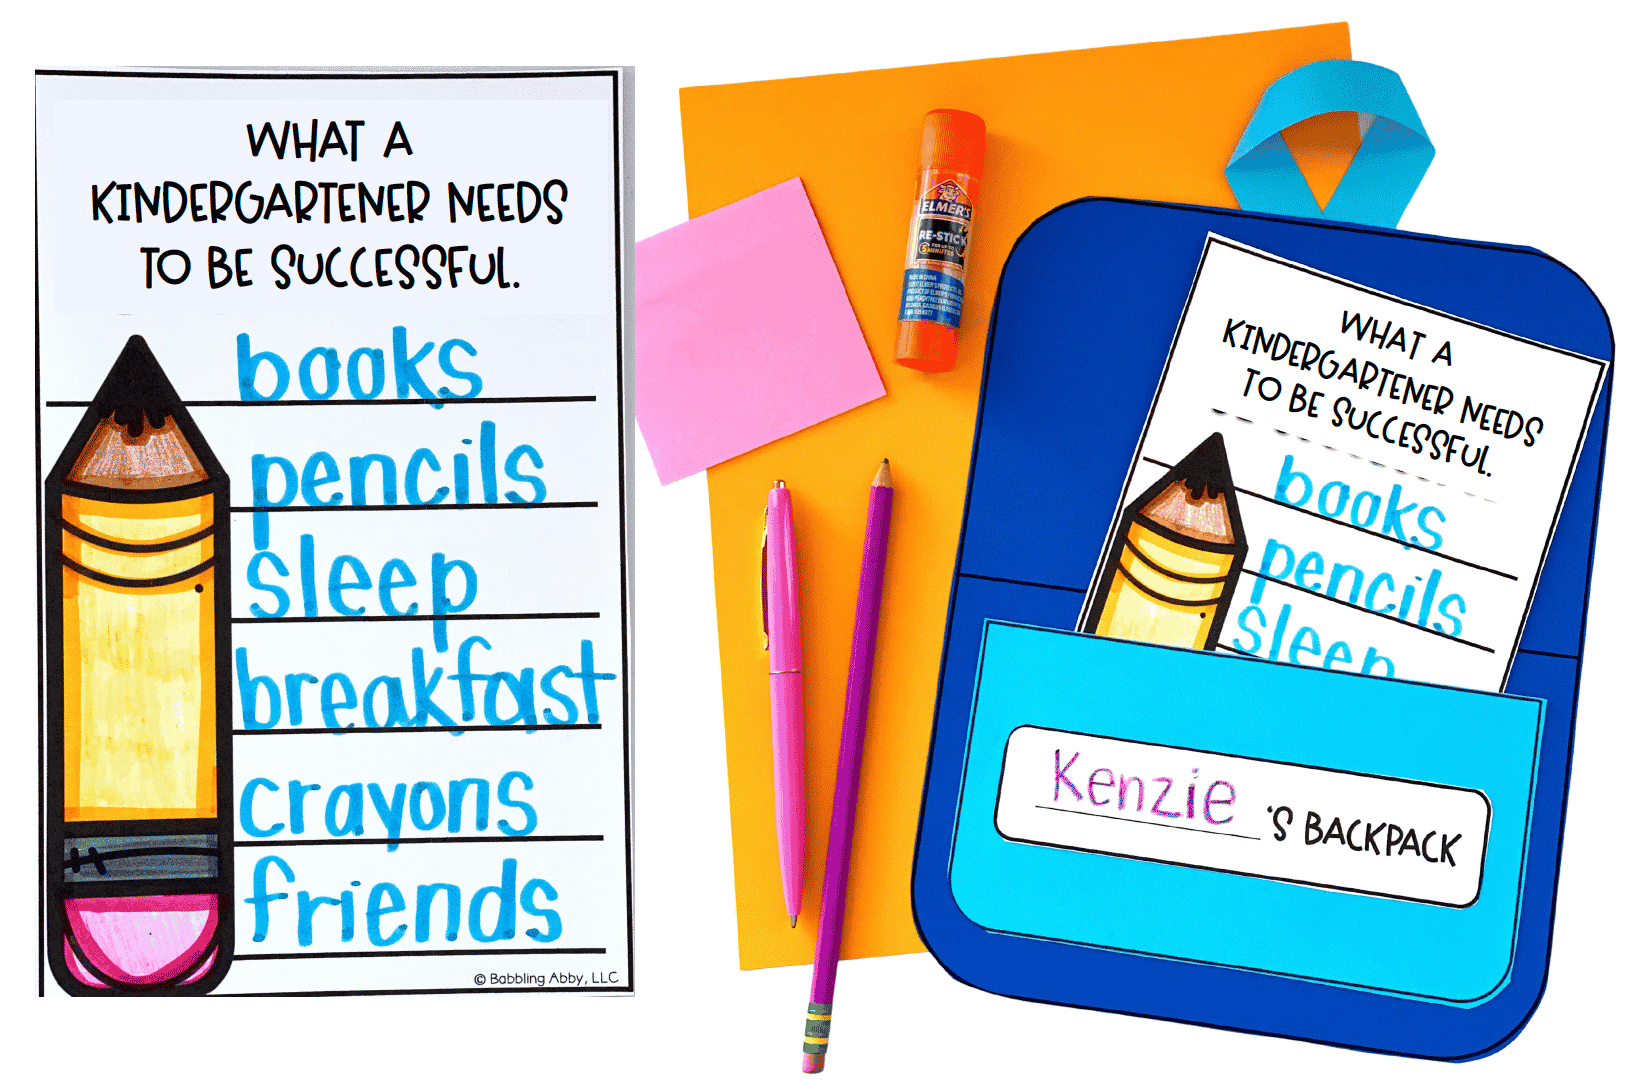 These are the best back to school activities for kindergarten. They will save you time and energy as you prep for the first week of school. There are 13 different engaging activities to choose from. babblingabby.net